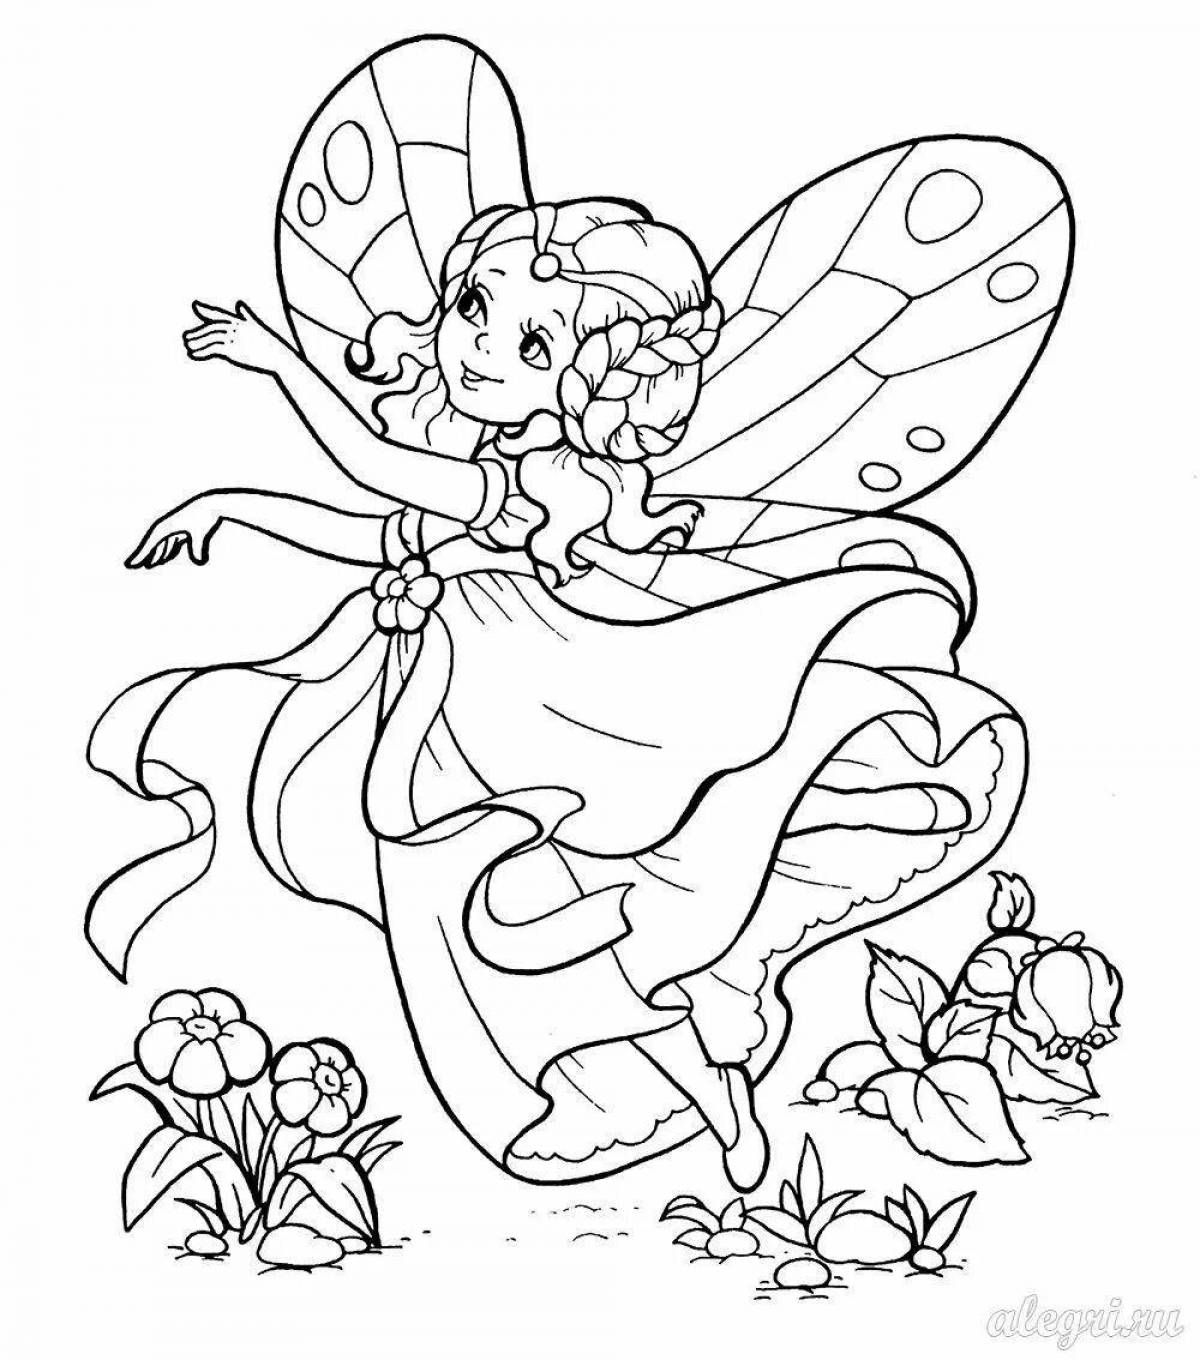 Funny fairy coloring book